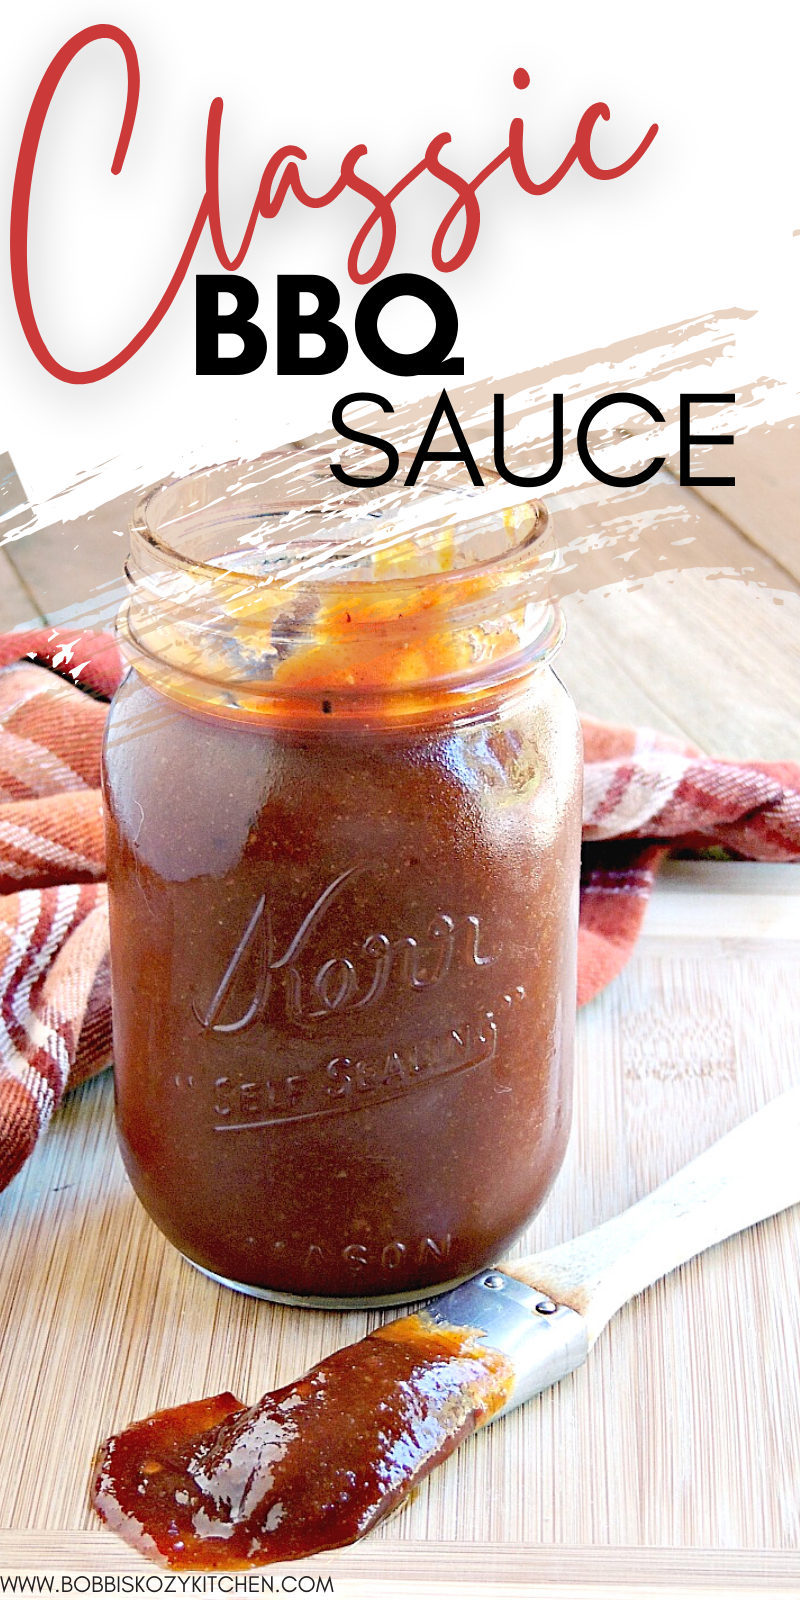 Classic BBQ Sauce - This classic homemade BBQ sauce is sweet, tangy, and a little smoky, making it the perfect sauce for ribs, brisket, chicken, chops, and so much more. Made with ingredients you probably already have in your pantry and ready in a little over 30 minutes, start to finish. #homemade #BBQ #sauce #classic #pork #chicken #beef